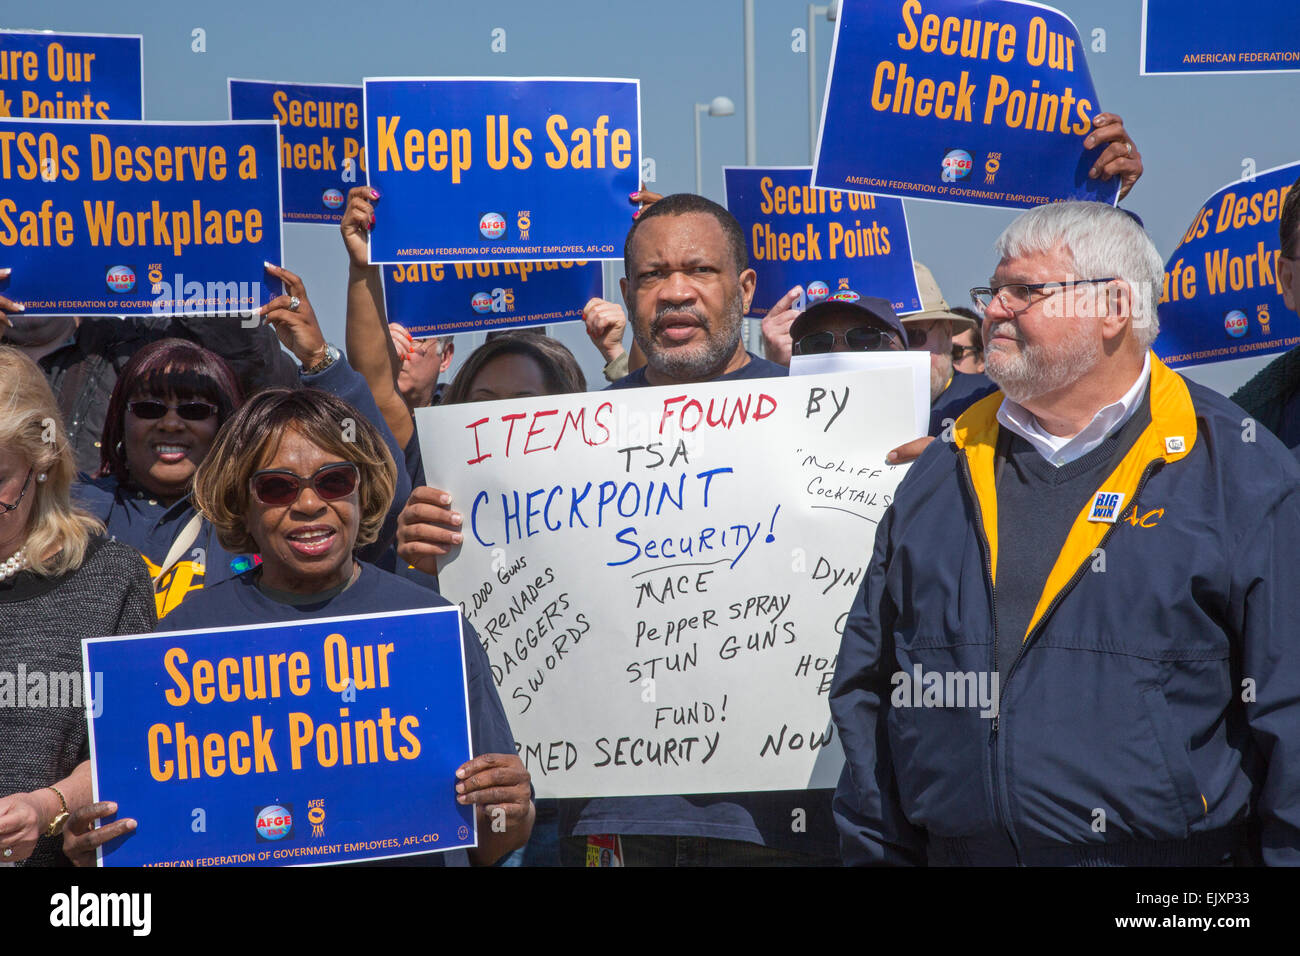 Romulus, Michigan, USA. Transportation Security Administration (TSA) officers rallied at Detroit Metro Airport to demand better protection while on the job. Citing attacks on security screeners at other airports, their union, the American Federation of Government Employees, called for the hiring of armed guards to protect them. AFGE President J. David Cox is at right. Credit:  Jim West/Alamy Live News Stock Photo